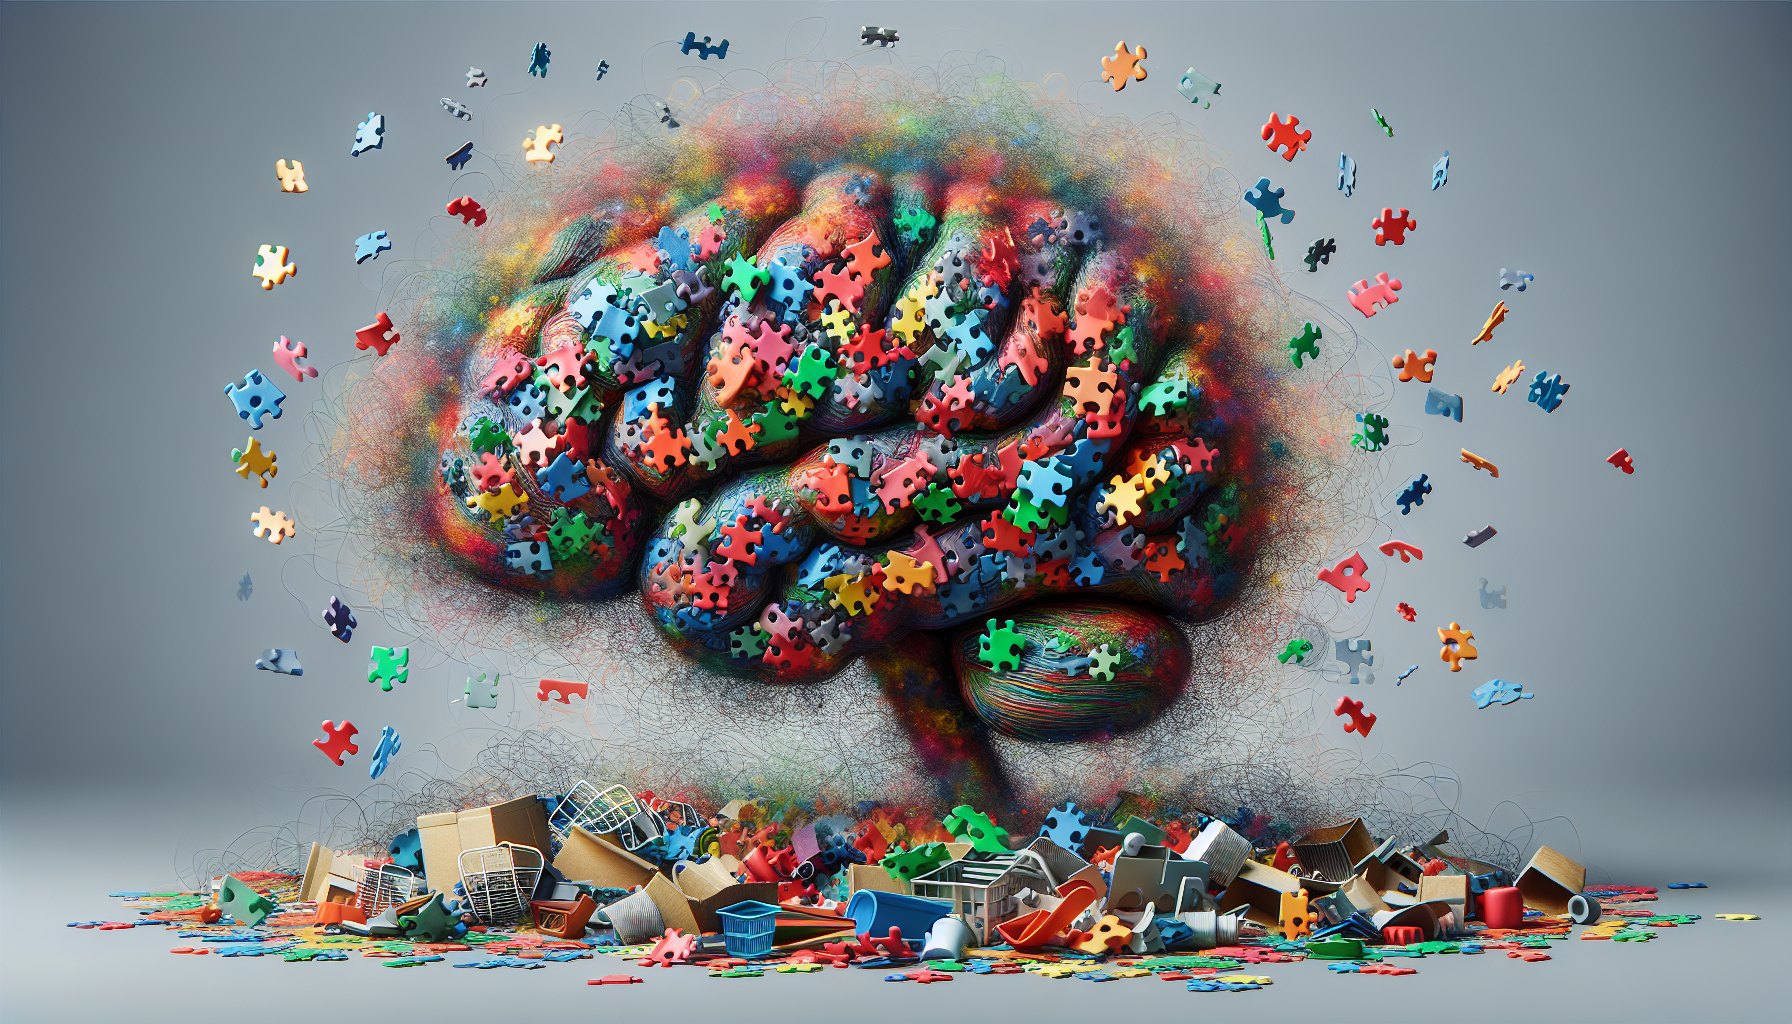 Illustration representing information processing deficits with scattered thoughts and confusion